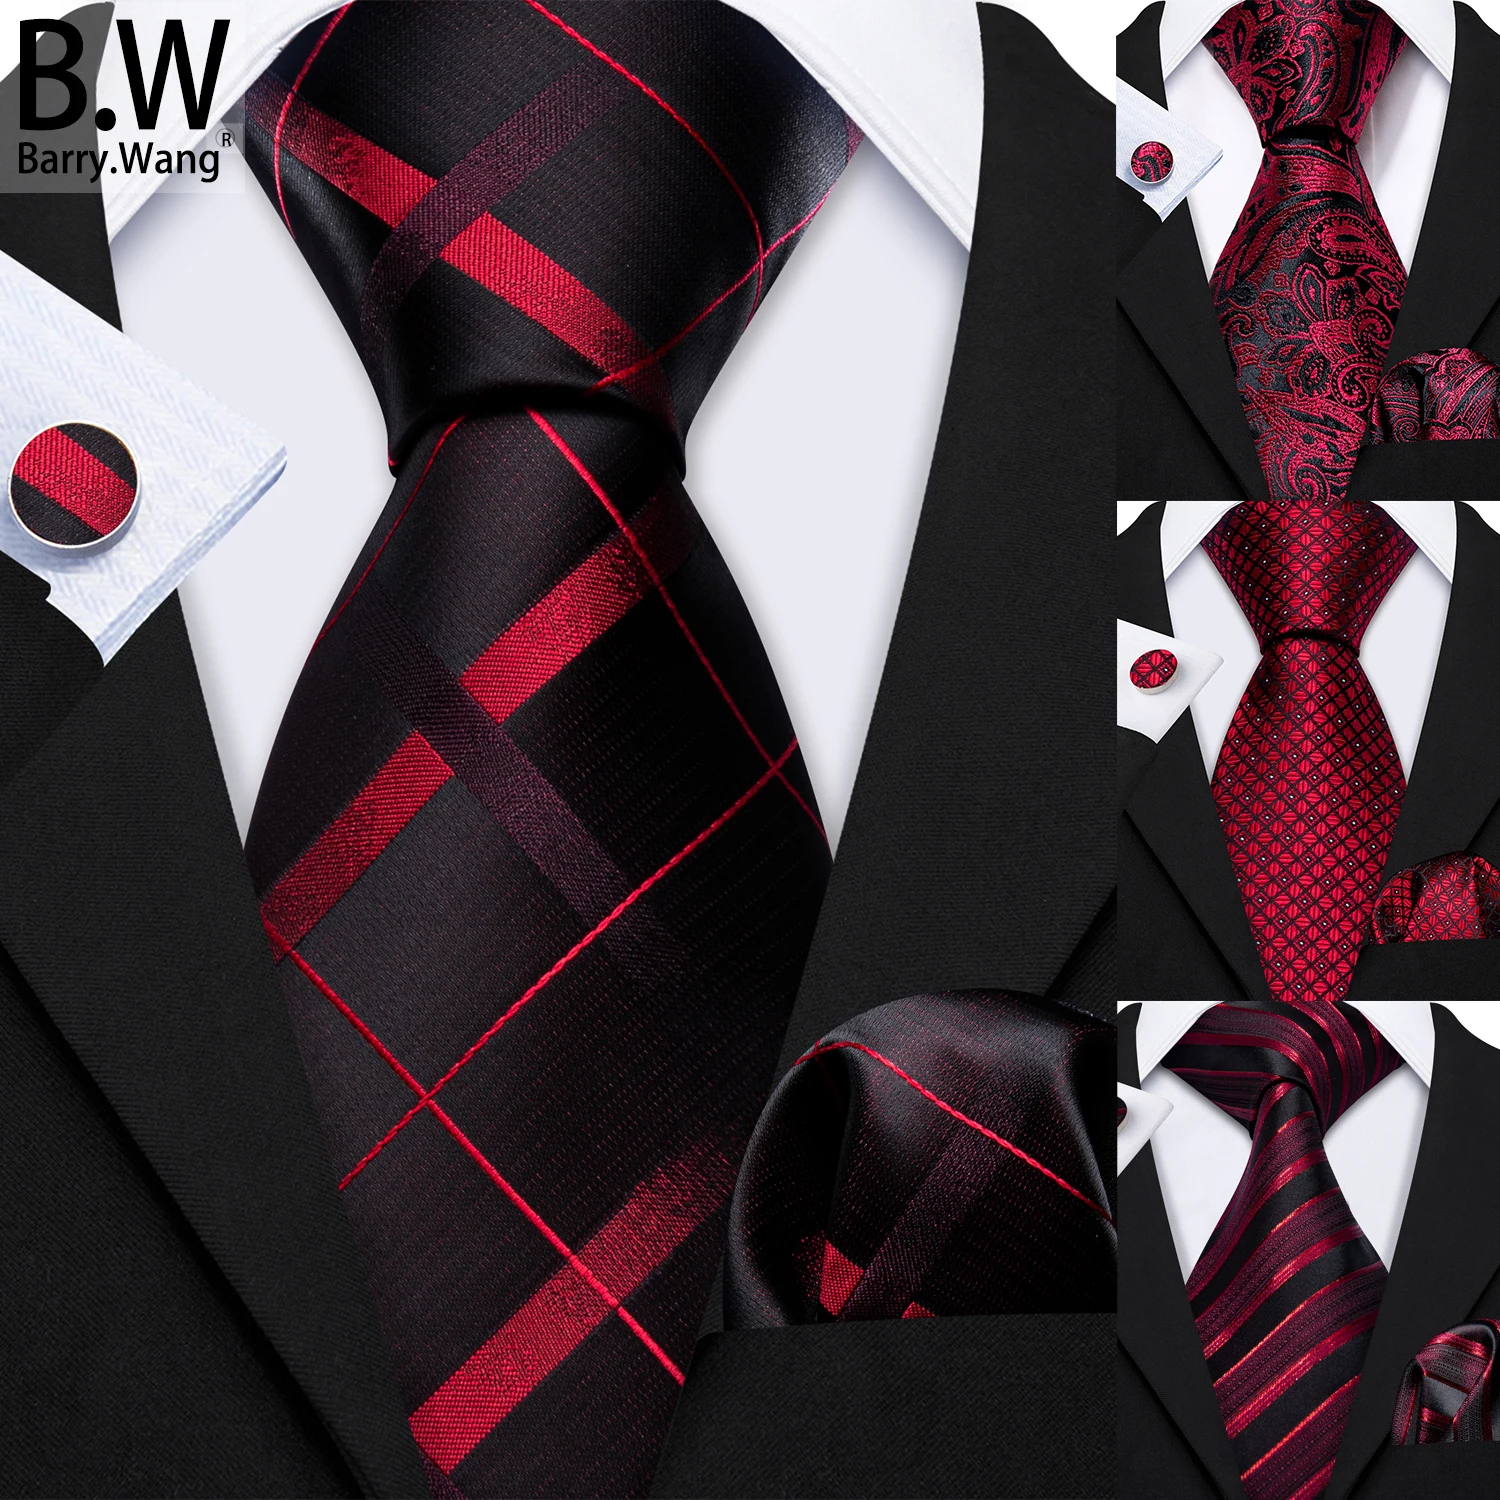 

Barry.Wang Red and Black Silk Men's Tie Pocket Square Cufflinks Set Jacquard Plaid Paisley Floral Necktie Male Wedding Business